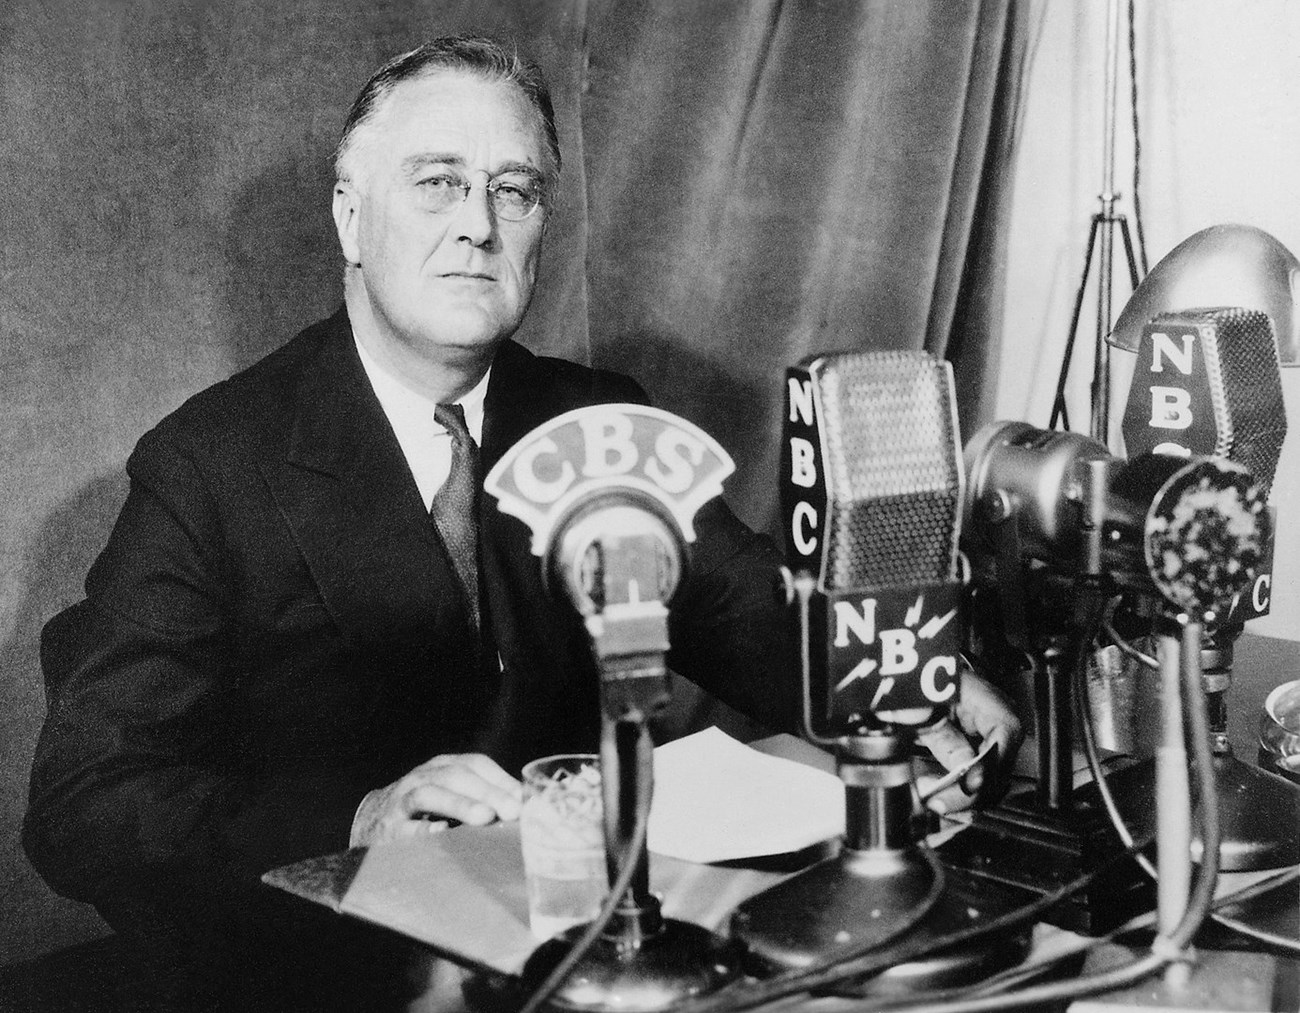 A black and white image of a man at a desk delivering a radio address.